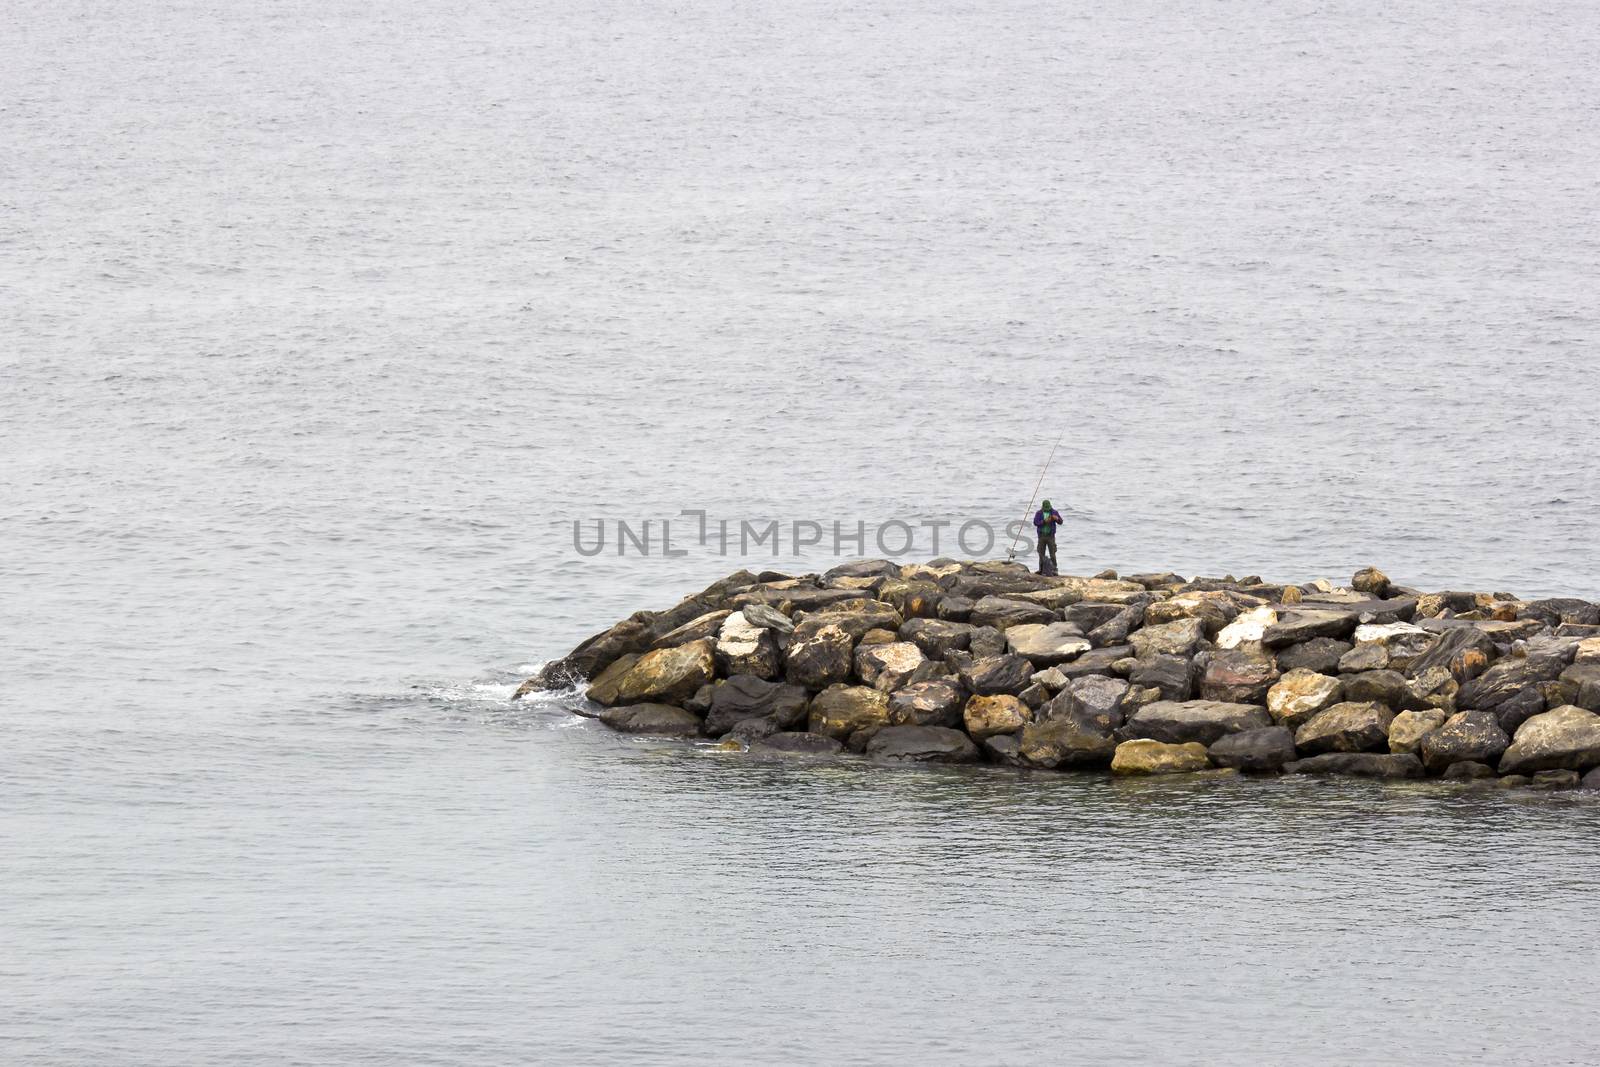 Fisher man with fishing rod on the stone groyne